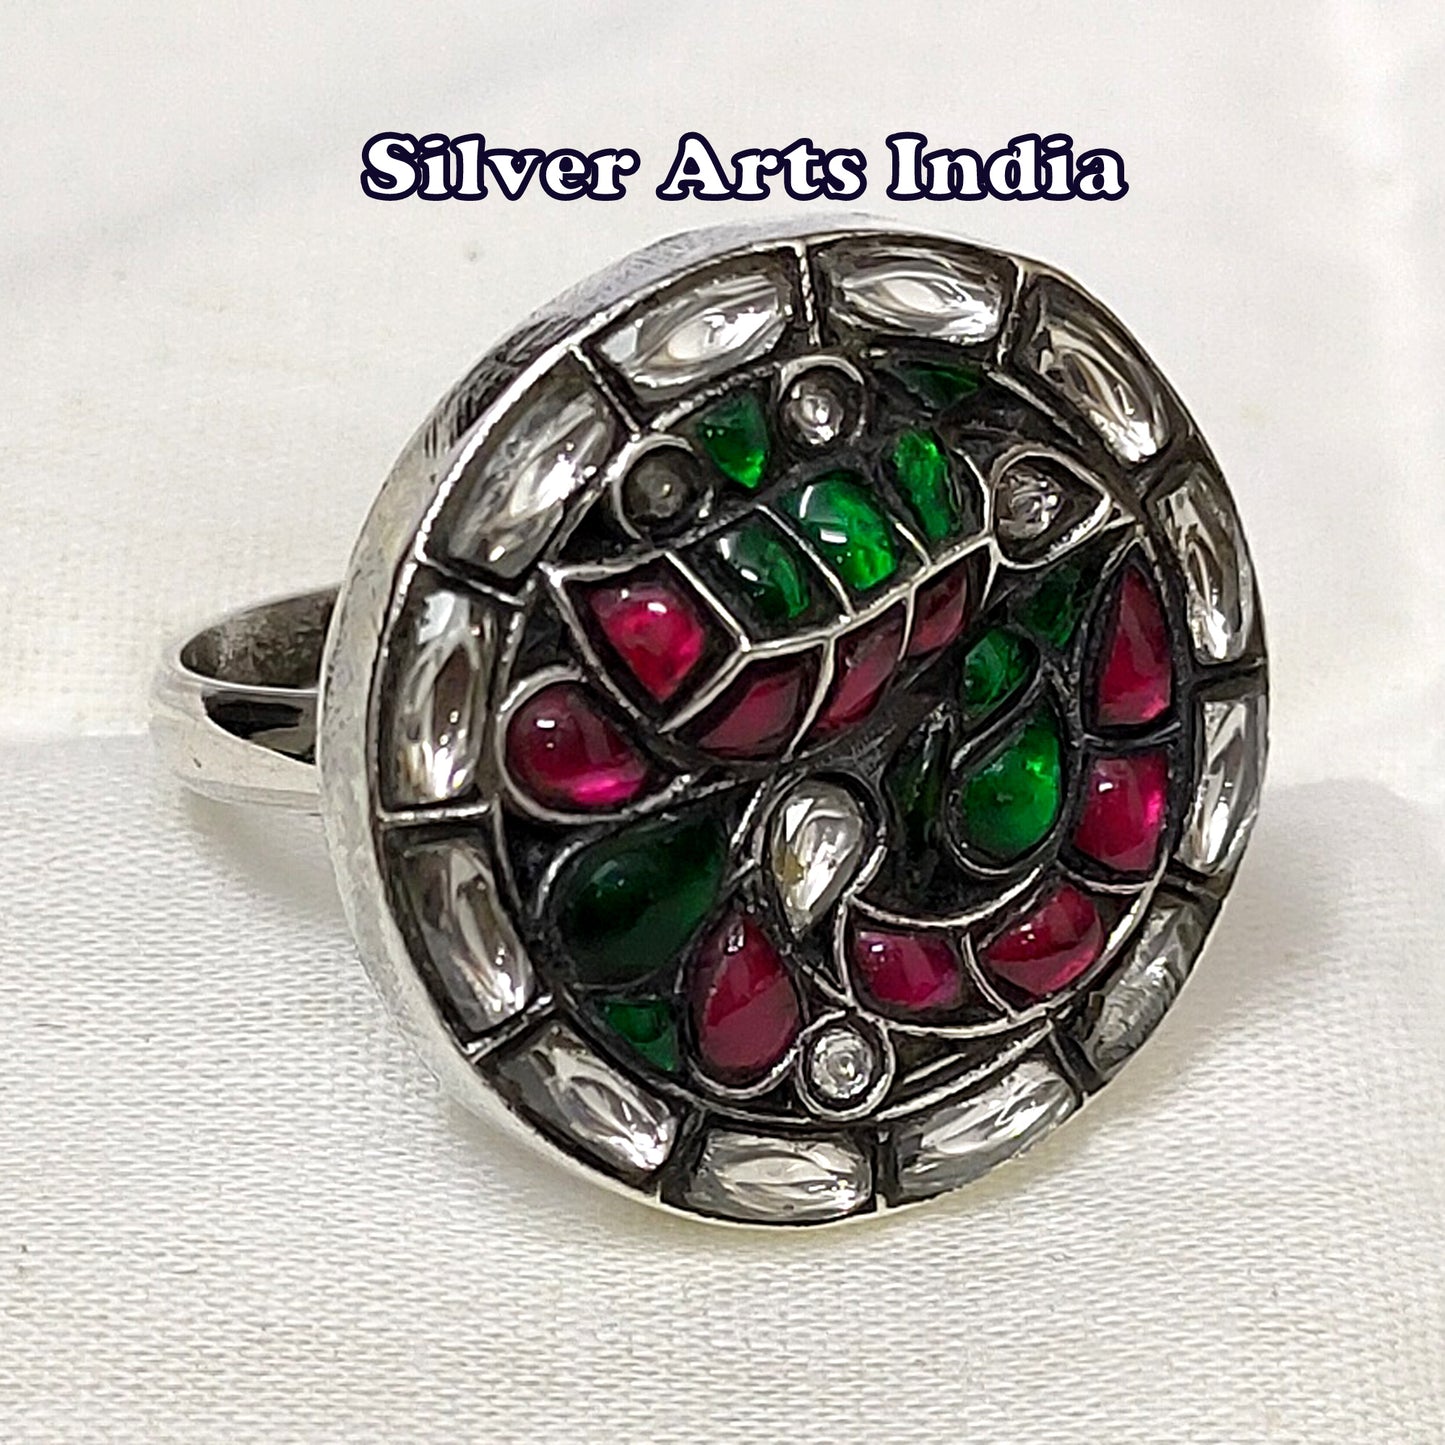 Kundan Polki Red Stones And Green Stones Solid 925 Silver Adjustable Ring